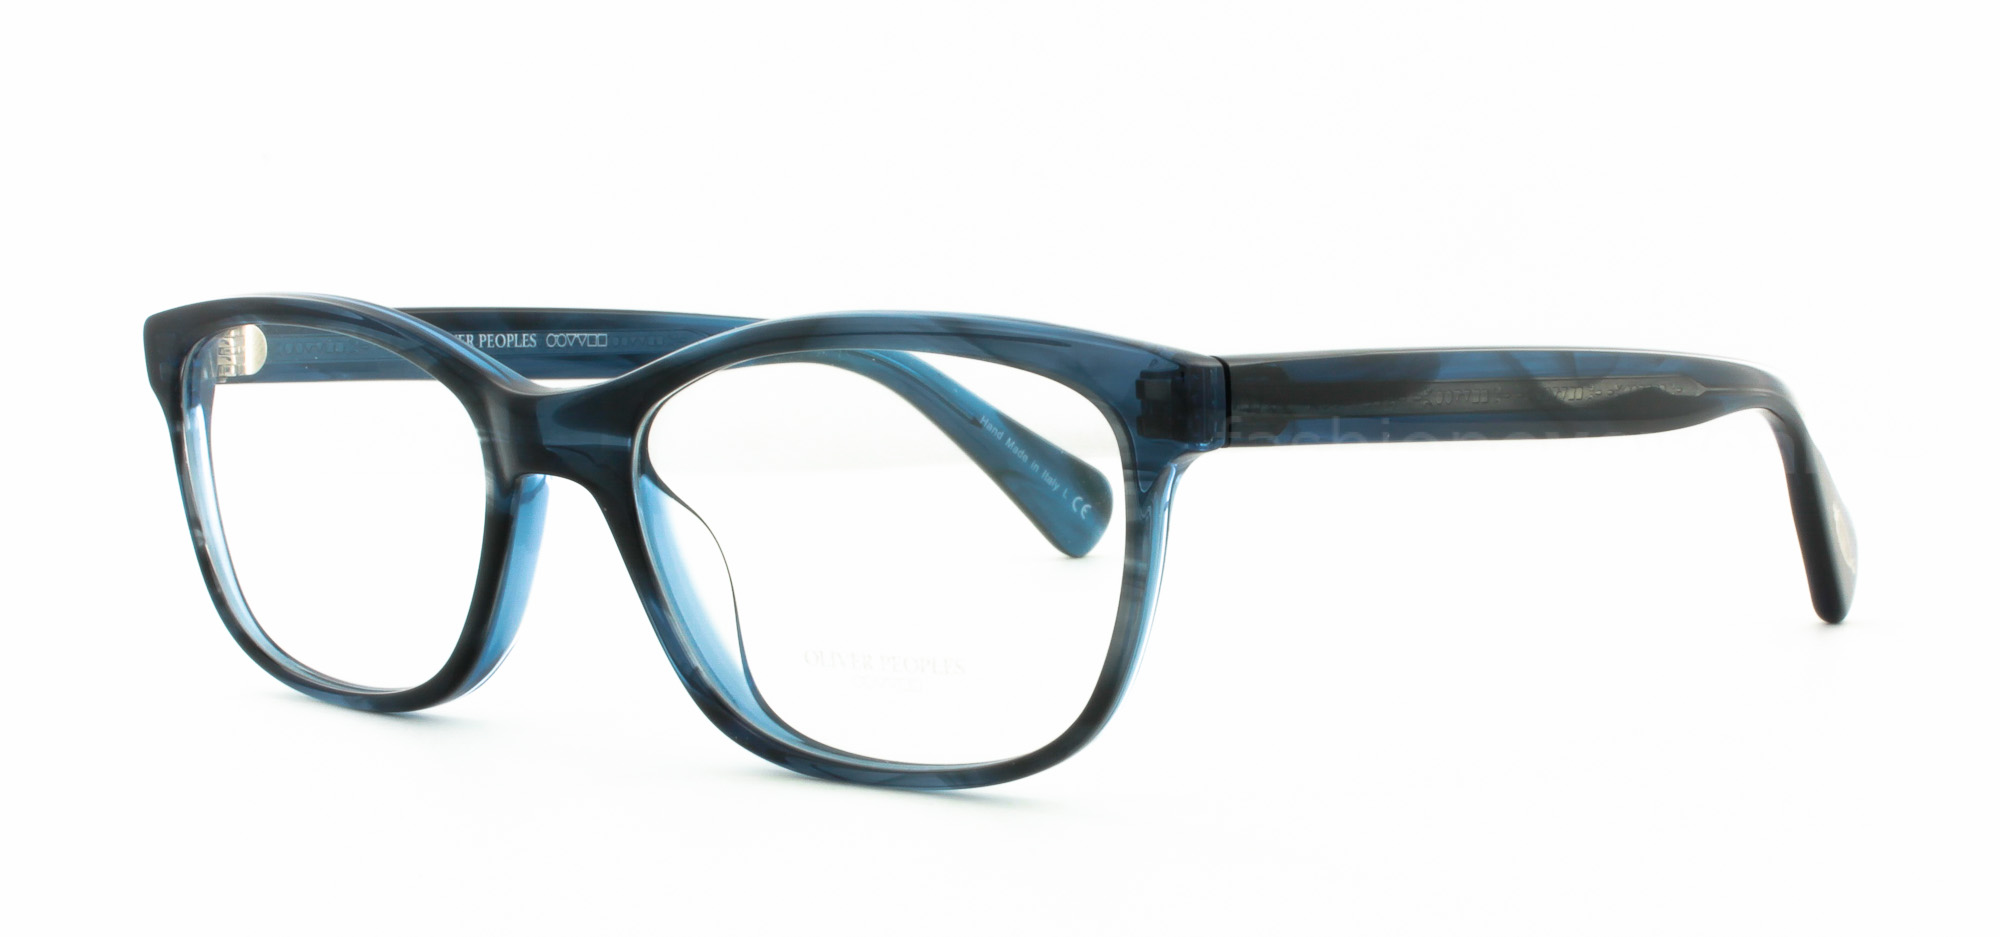 OLIVER PEOPLES FOLLIES 1200